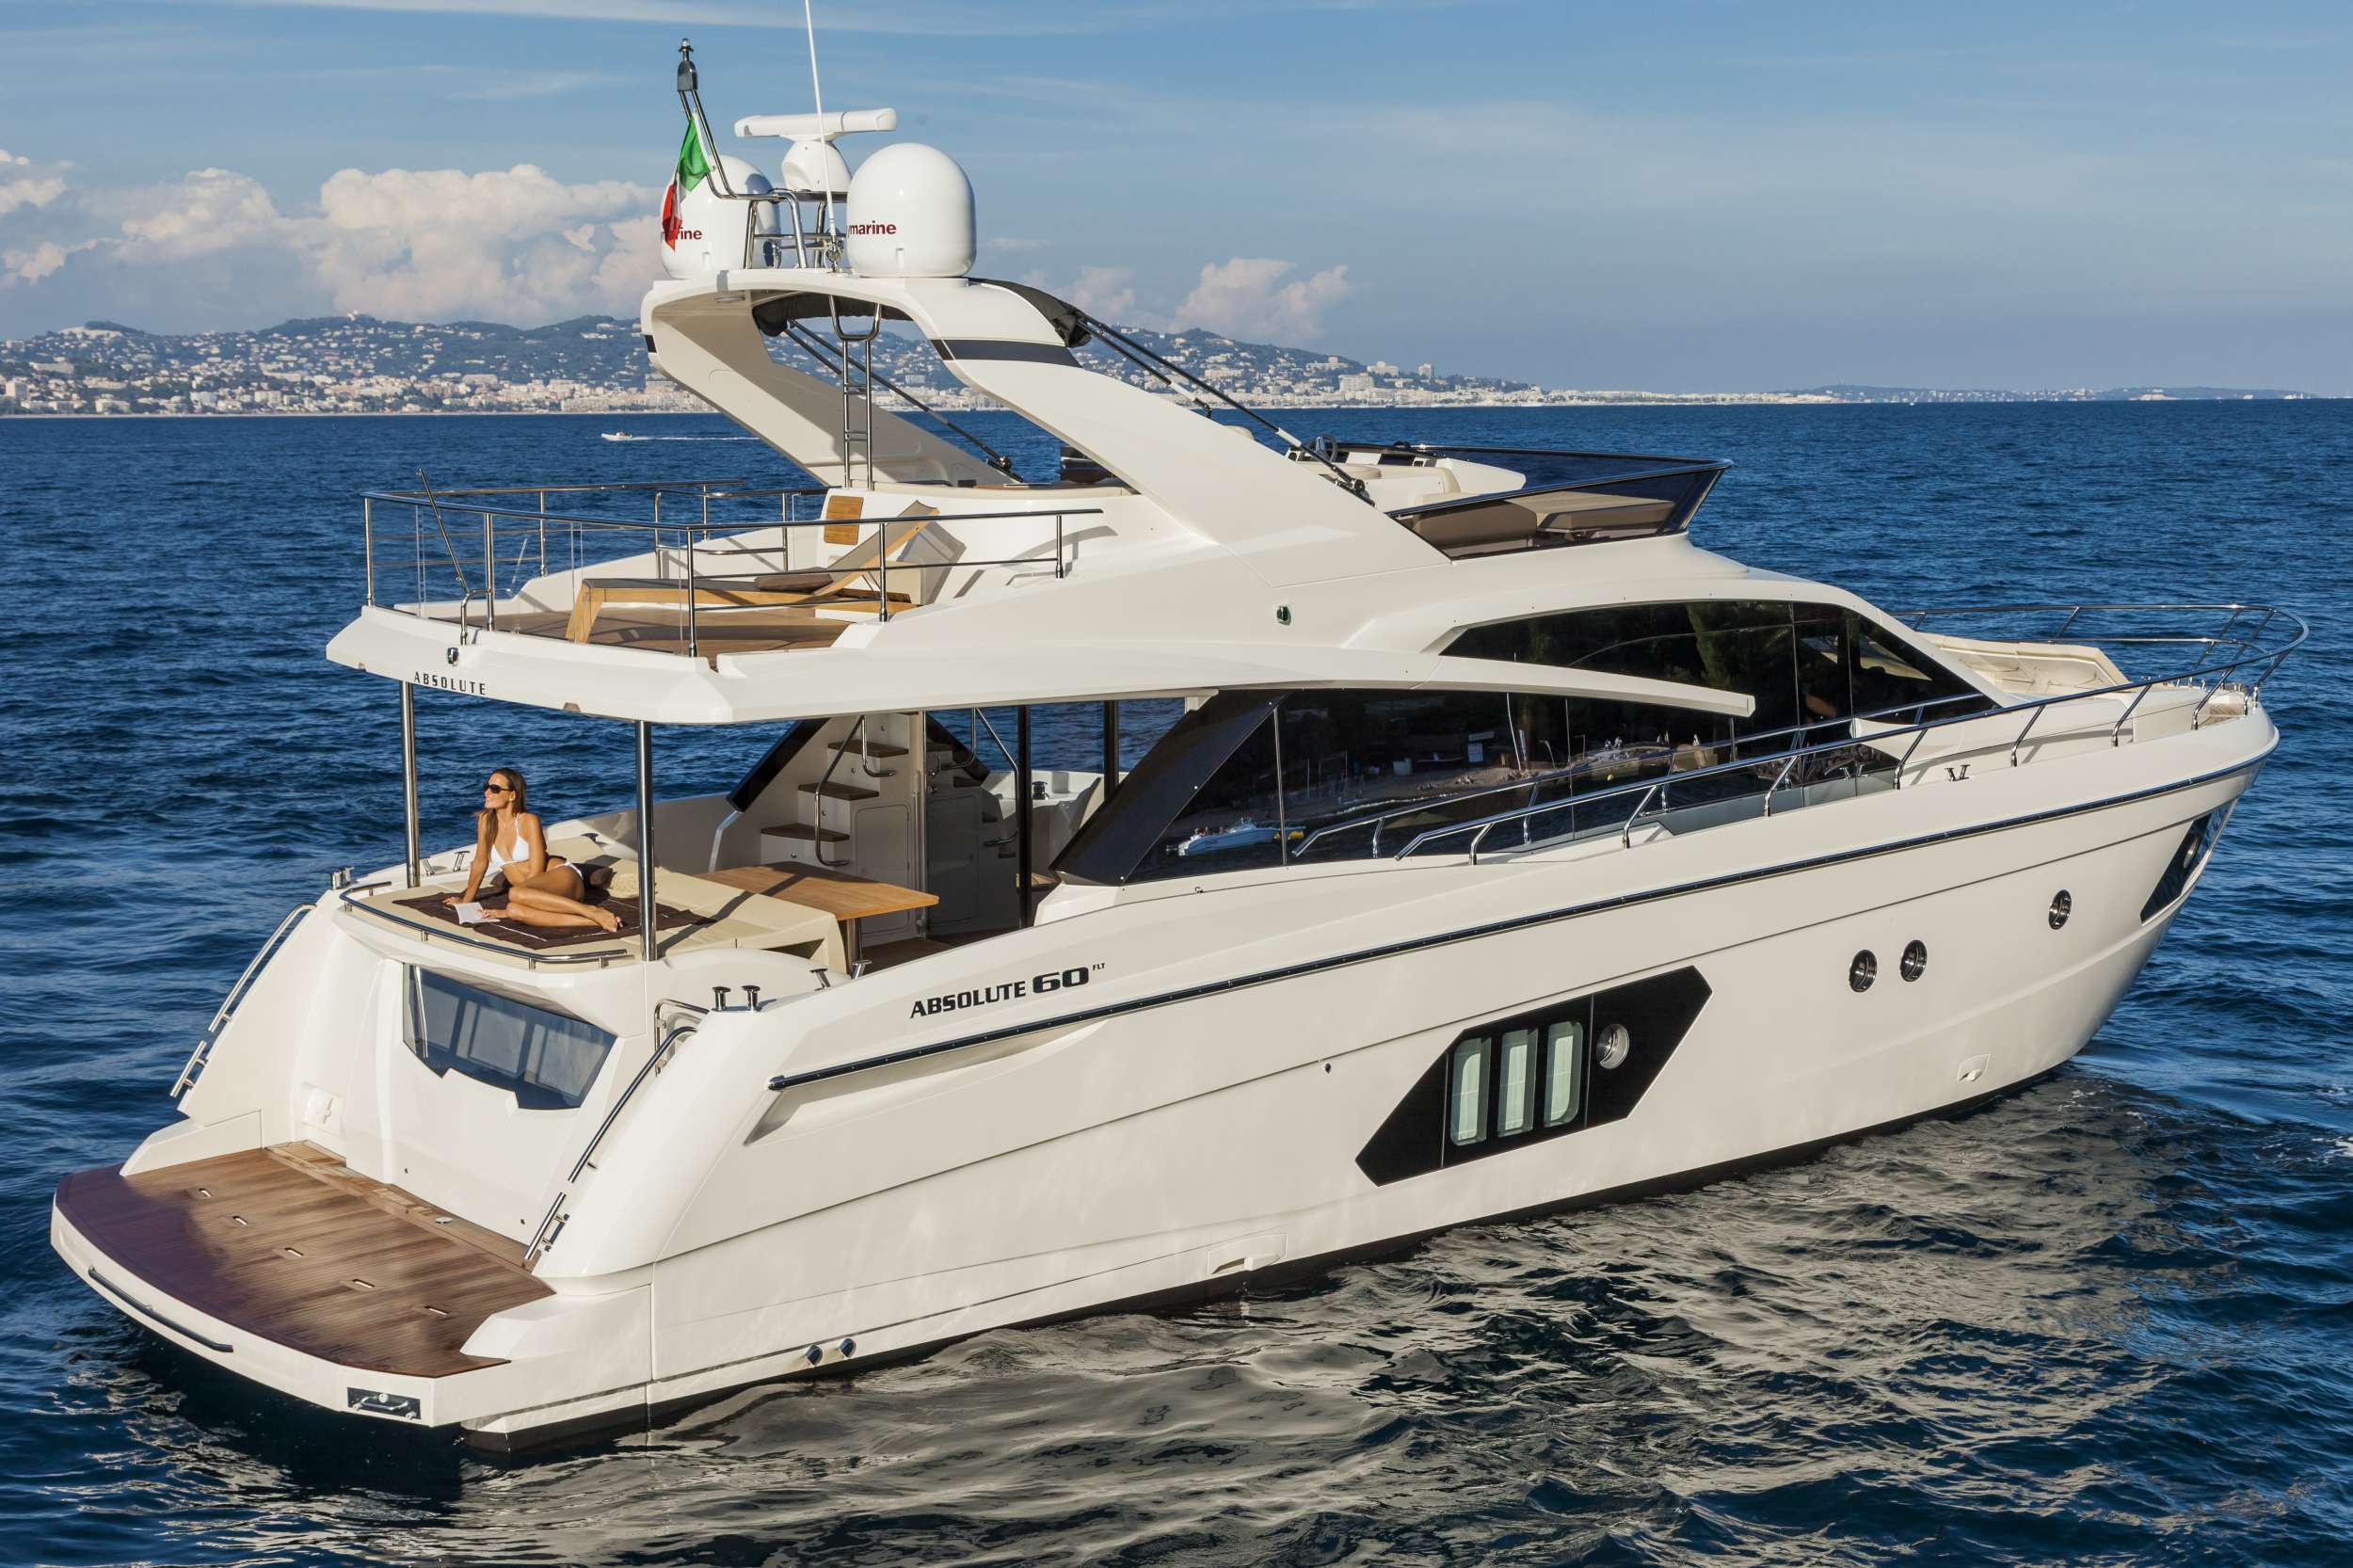 ABSOLUTE - Yacht Charter Antibes & Boat hire in Fr. Riviera, Corsica & Sardinia 1